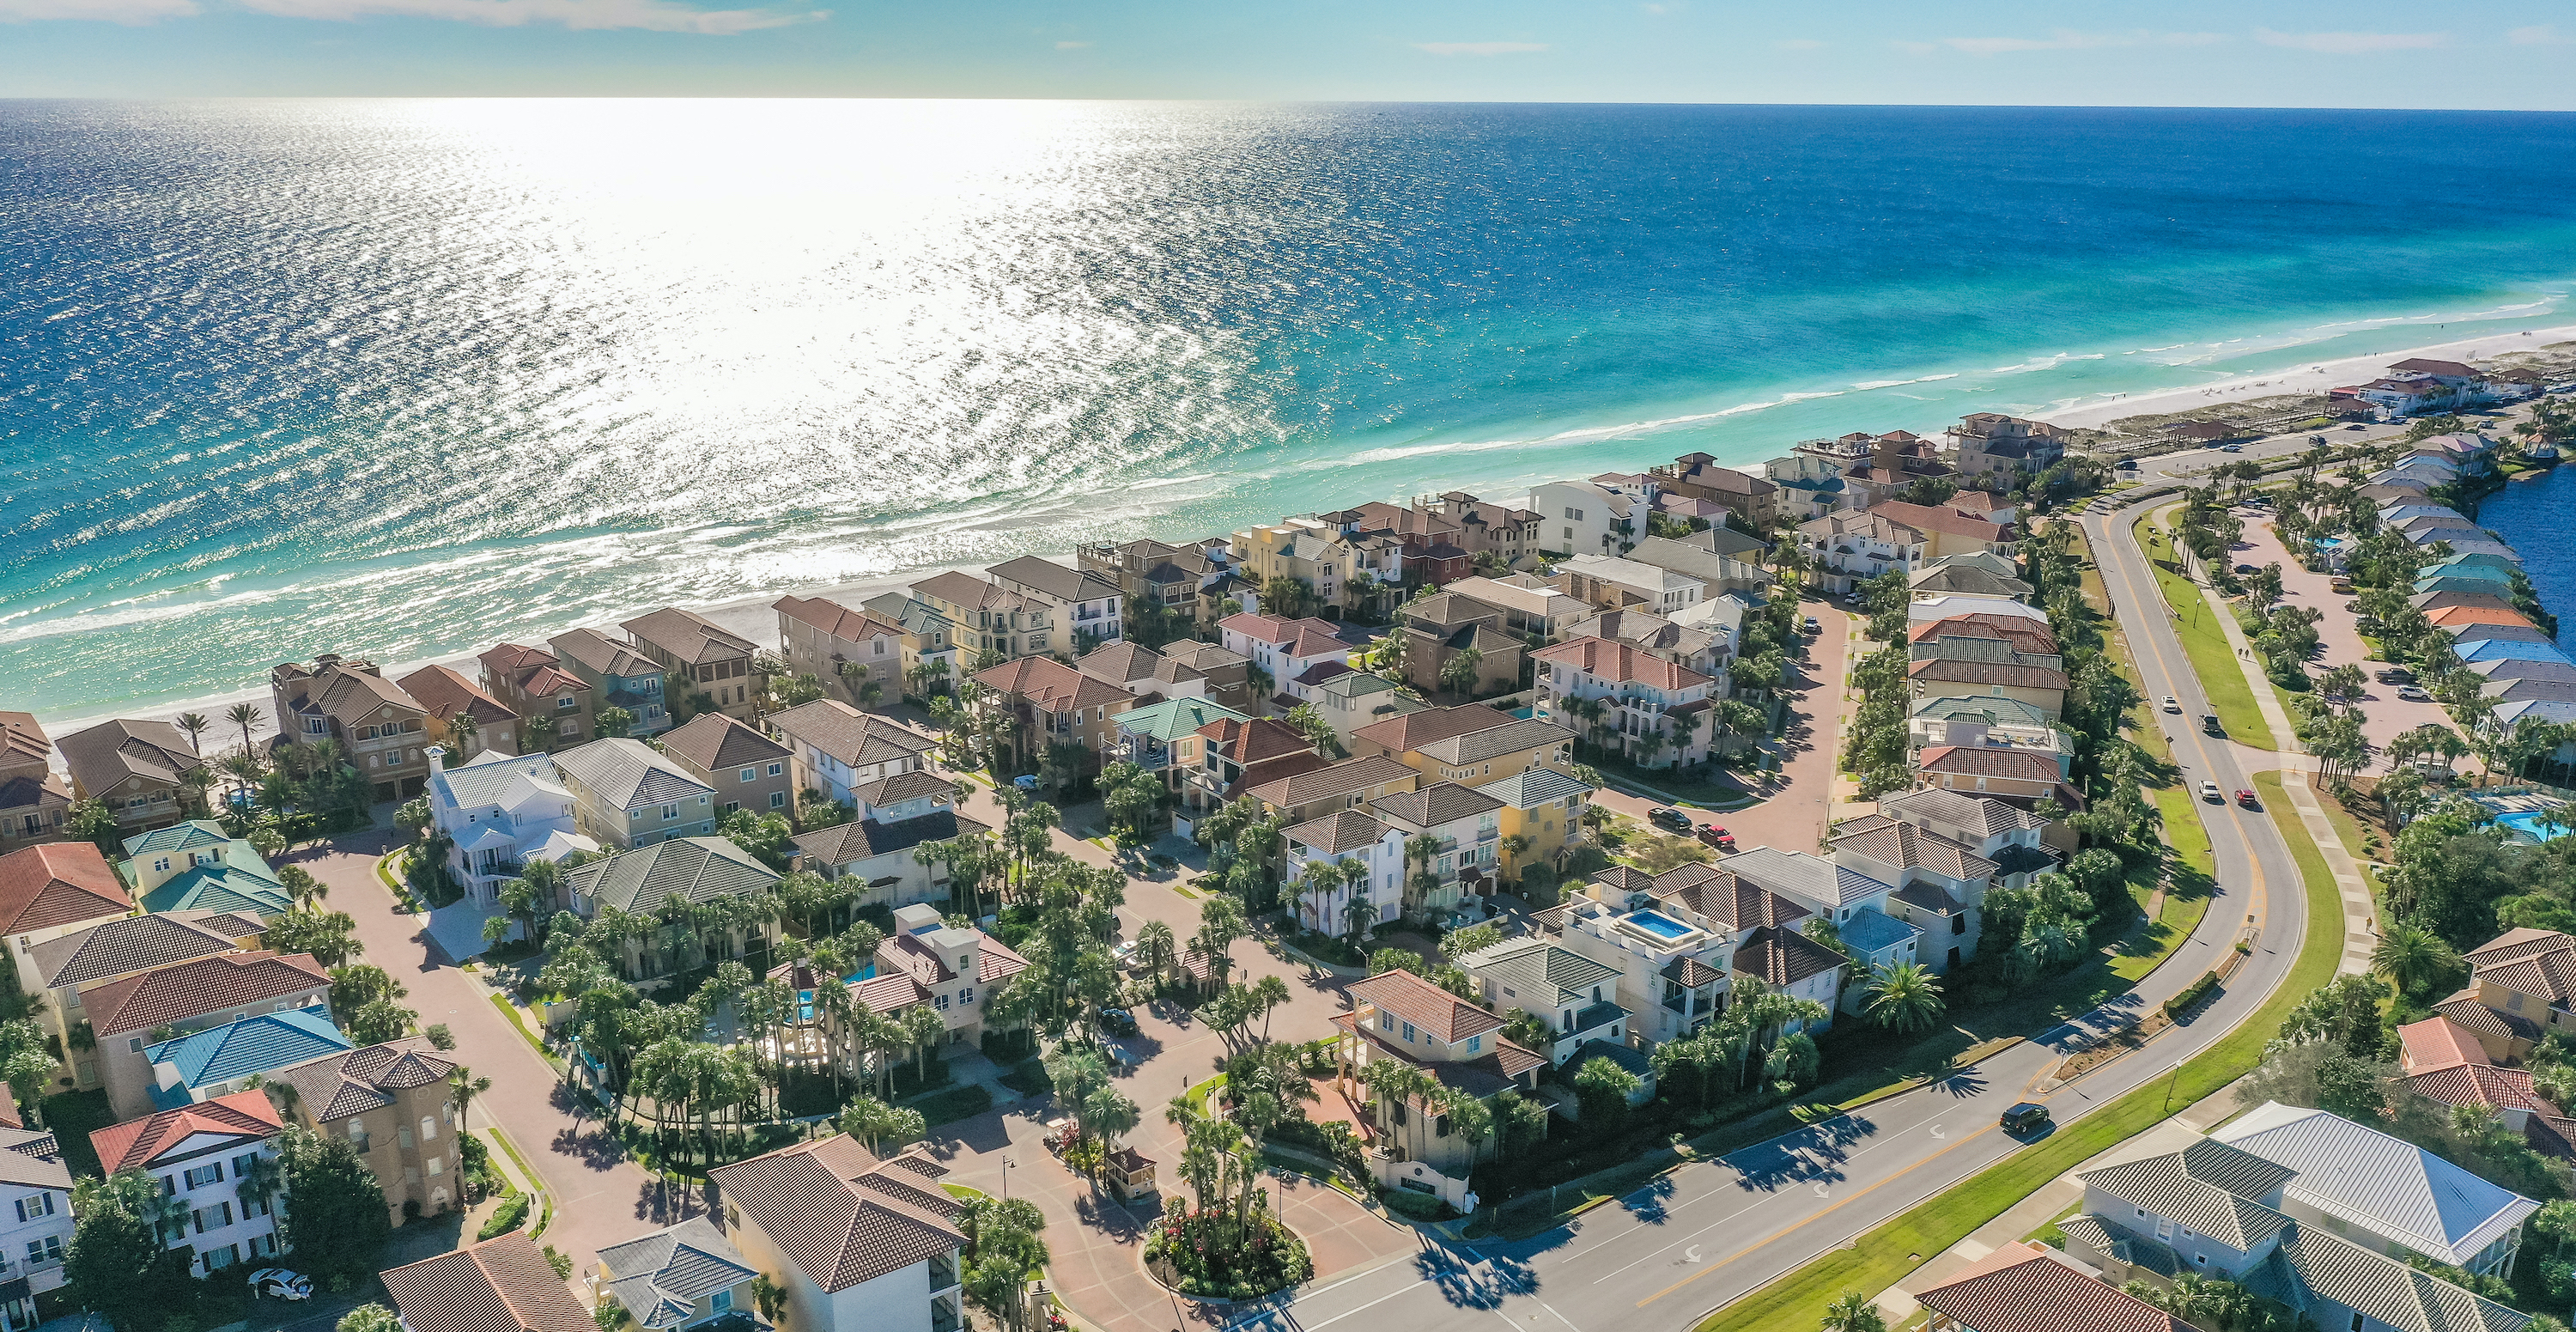 A peaceful aerial view of the Destiny By The Sea community homes along the Gulf